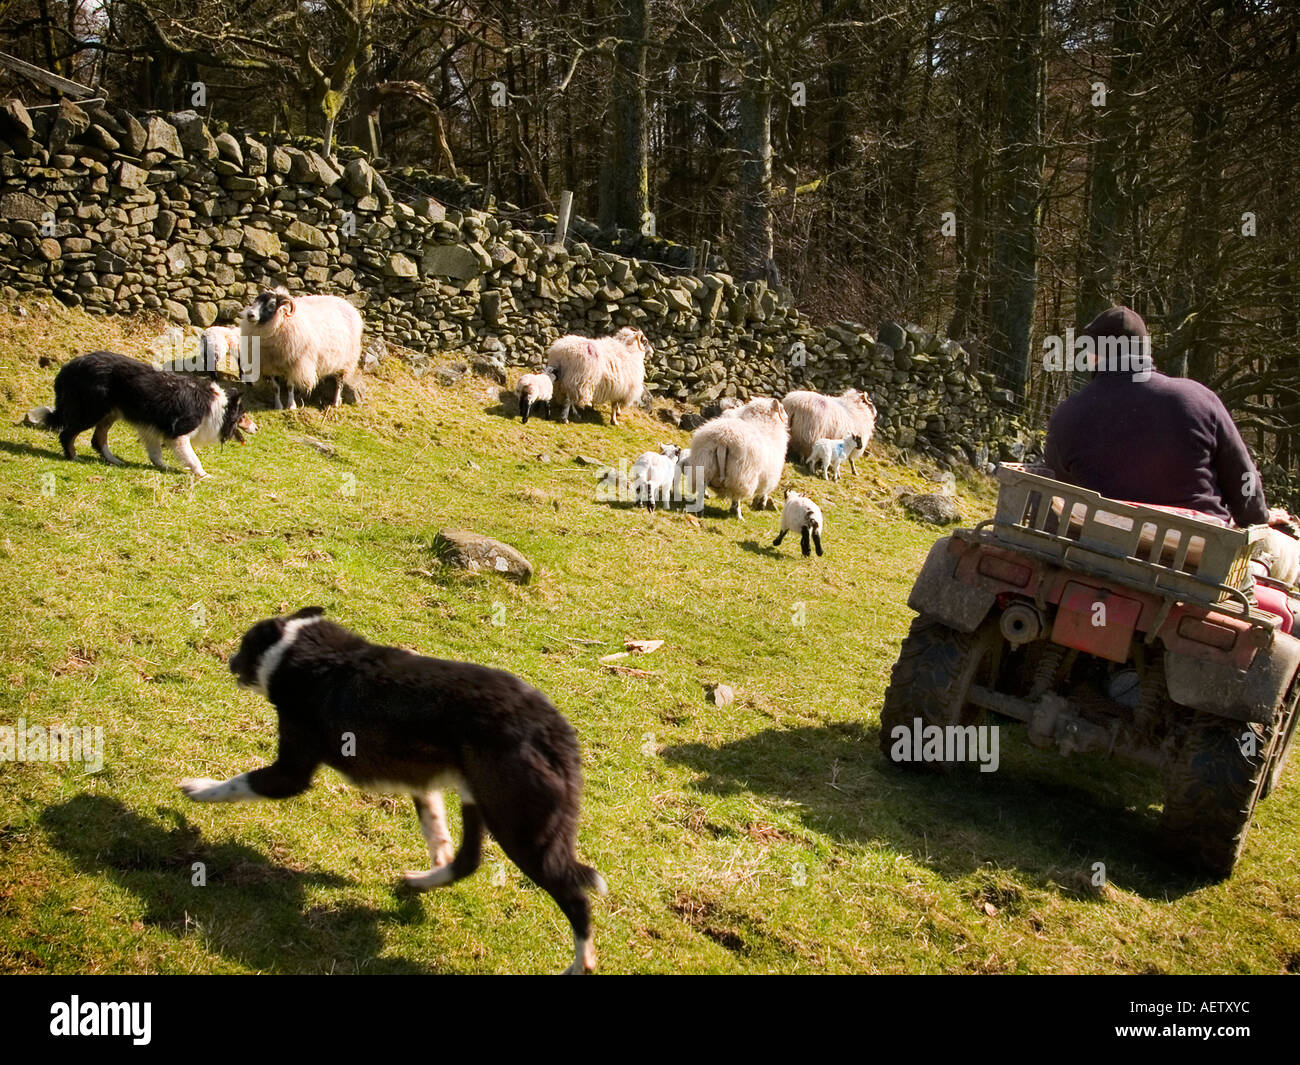 Shepherd and dogs rounding up ewes and lambs. Stock Photo